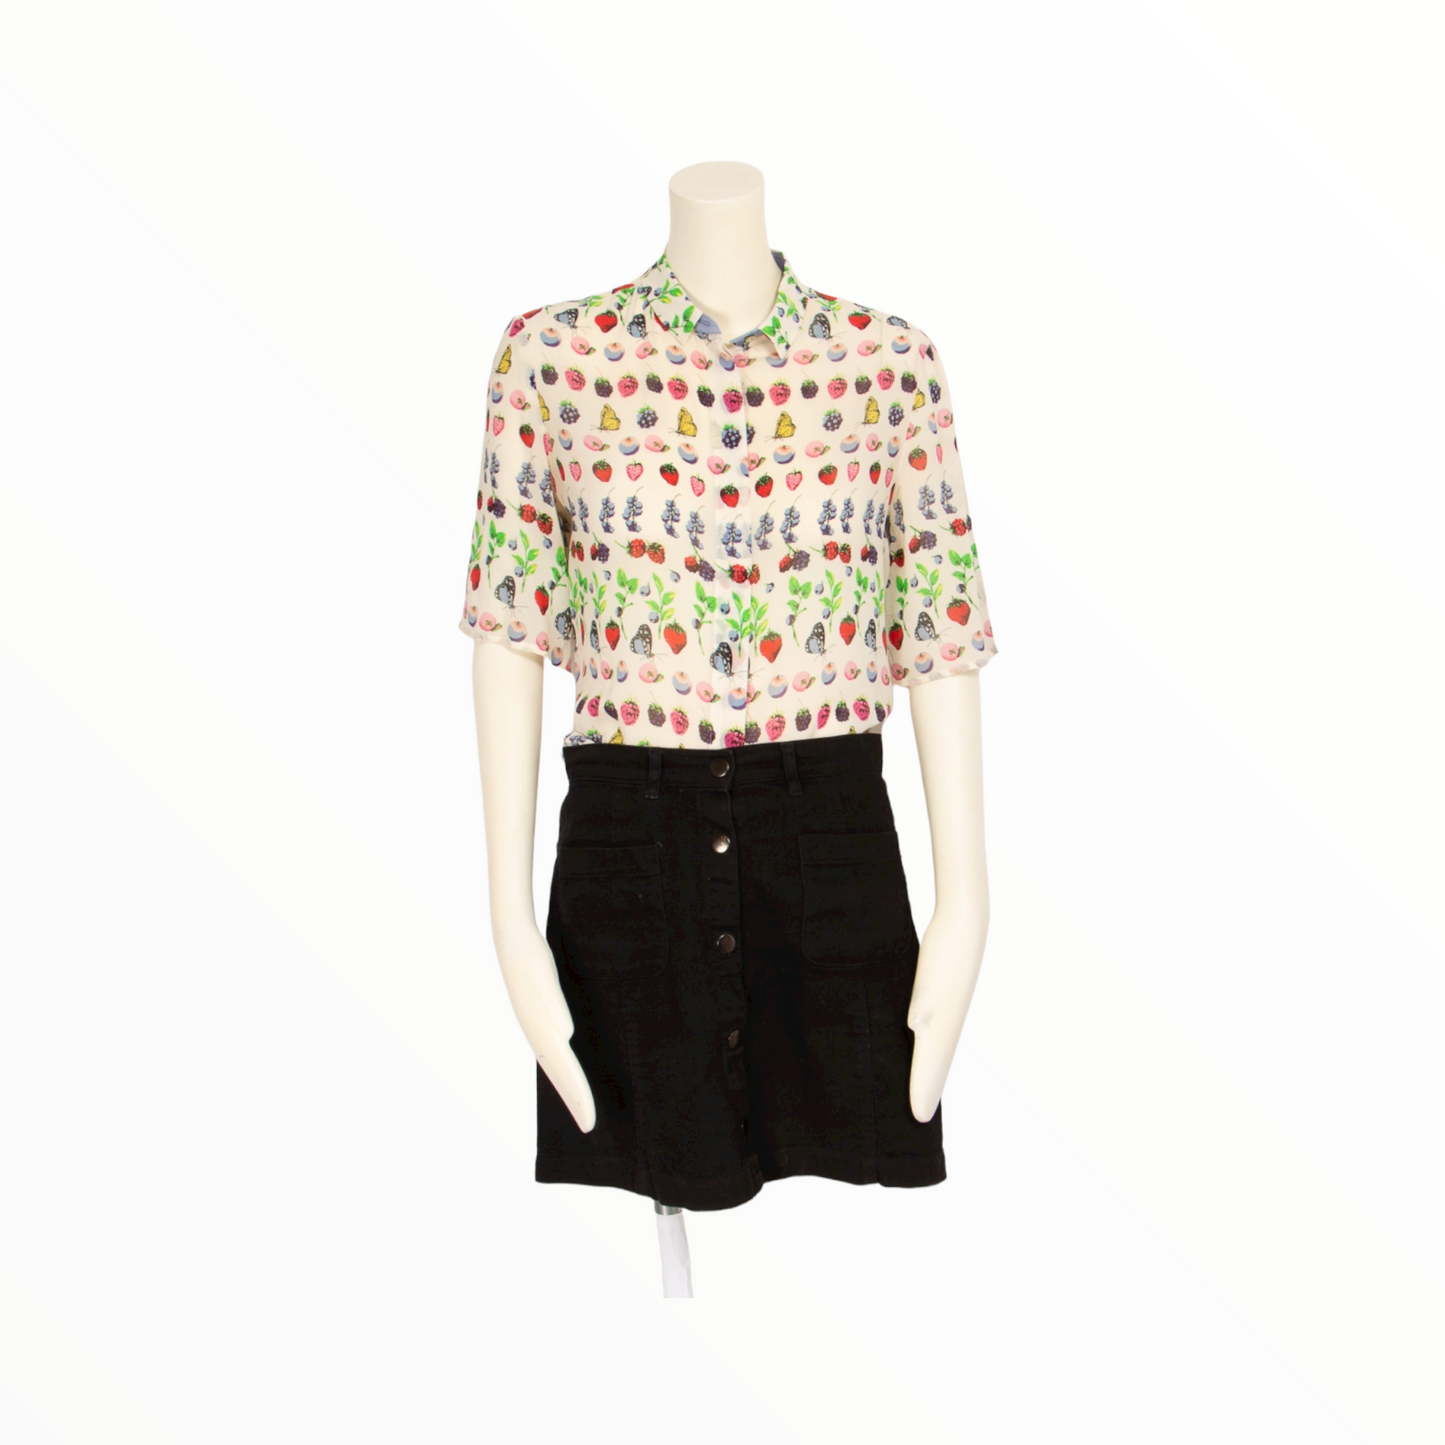 Versace vintage fruit and butterfly silk shirt - M - 2000s